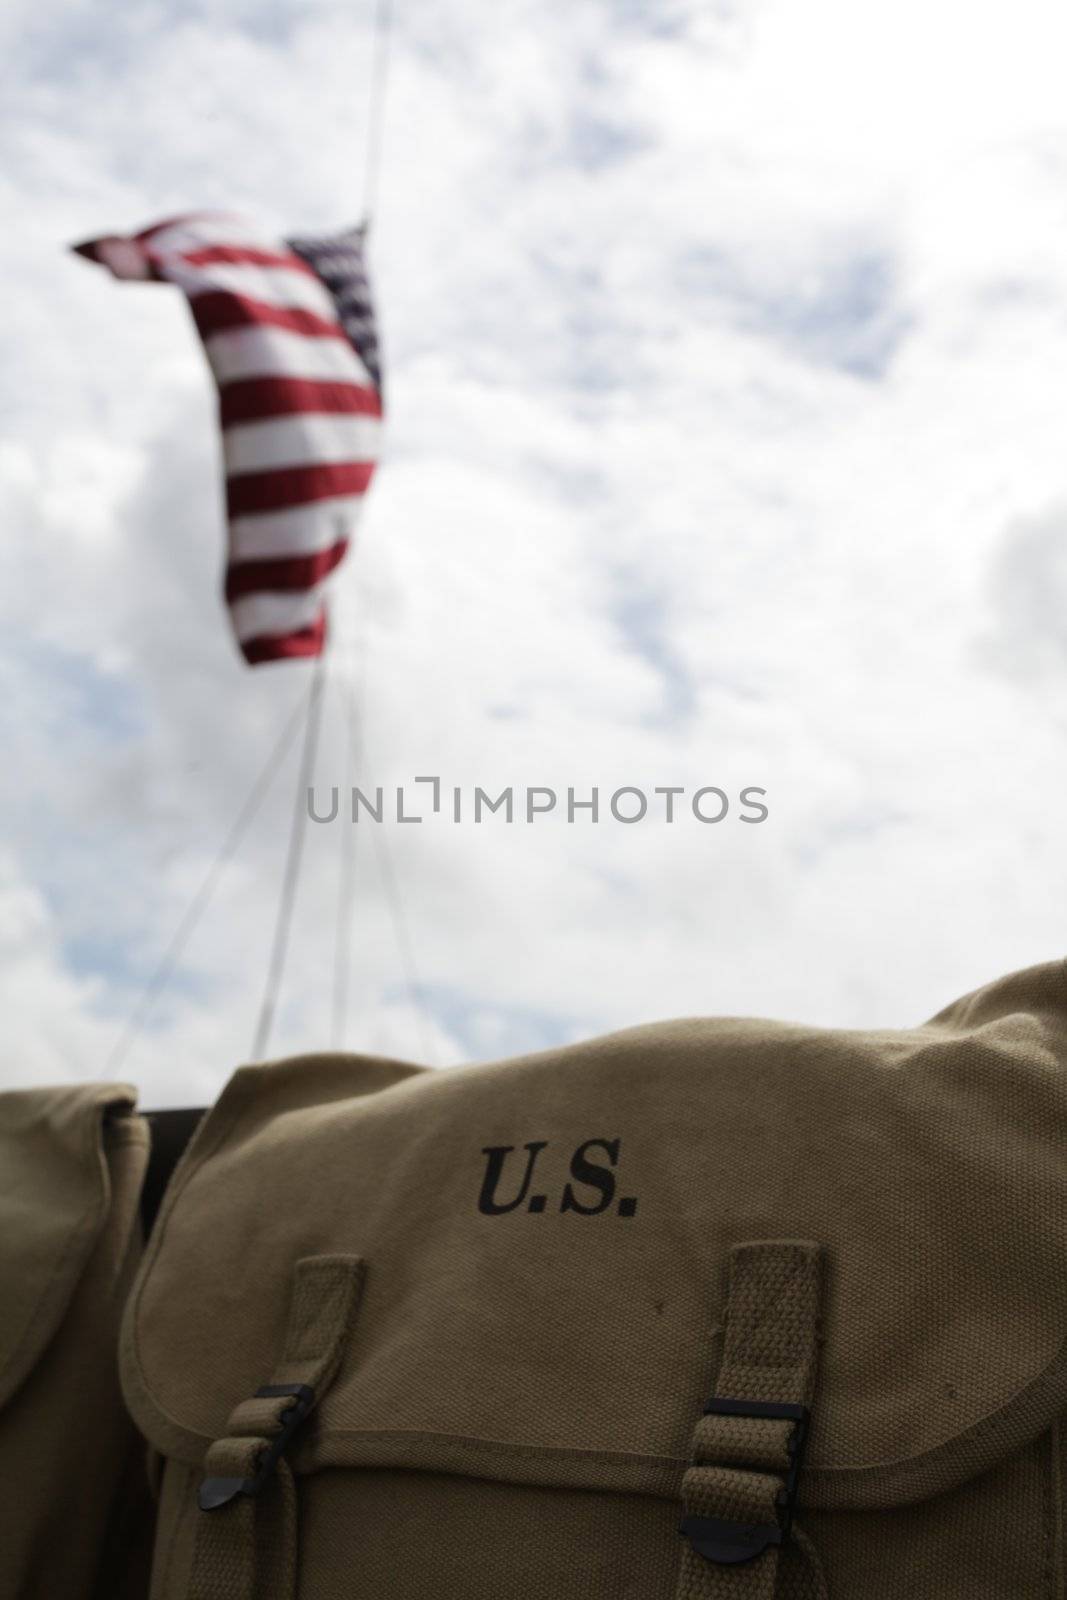 Stars & stripes with military mail bags